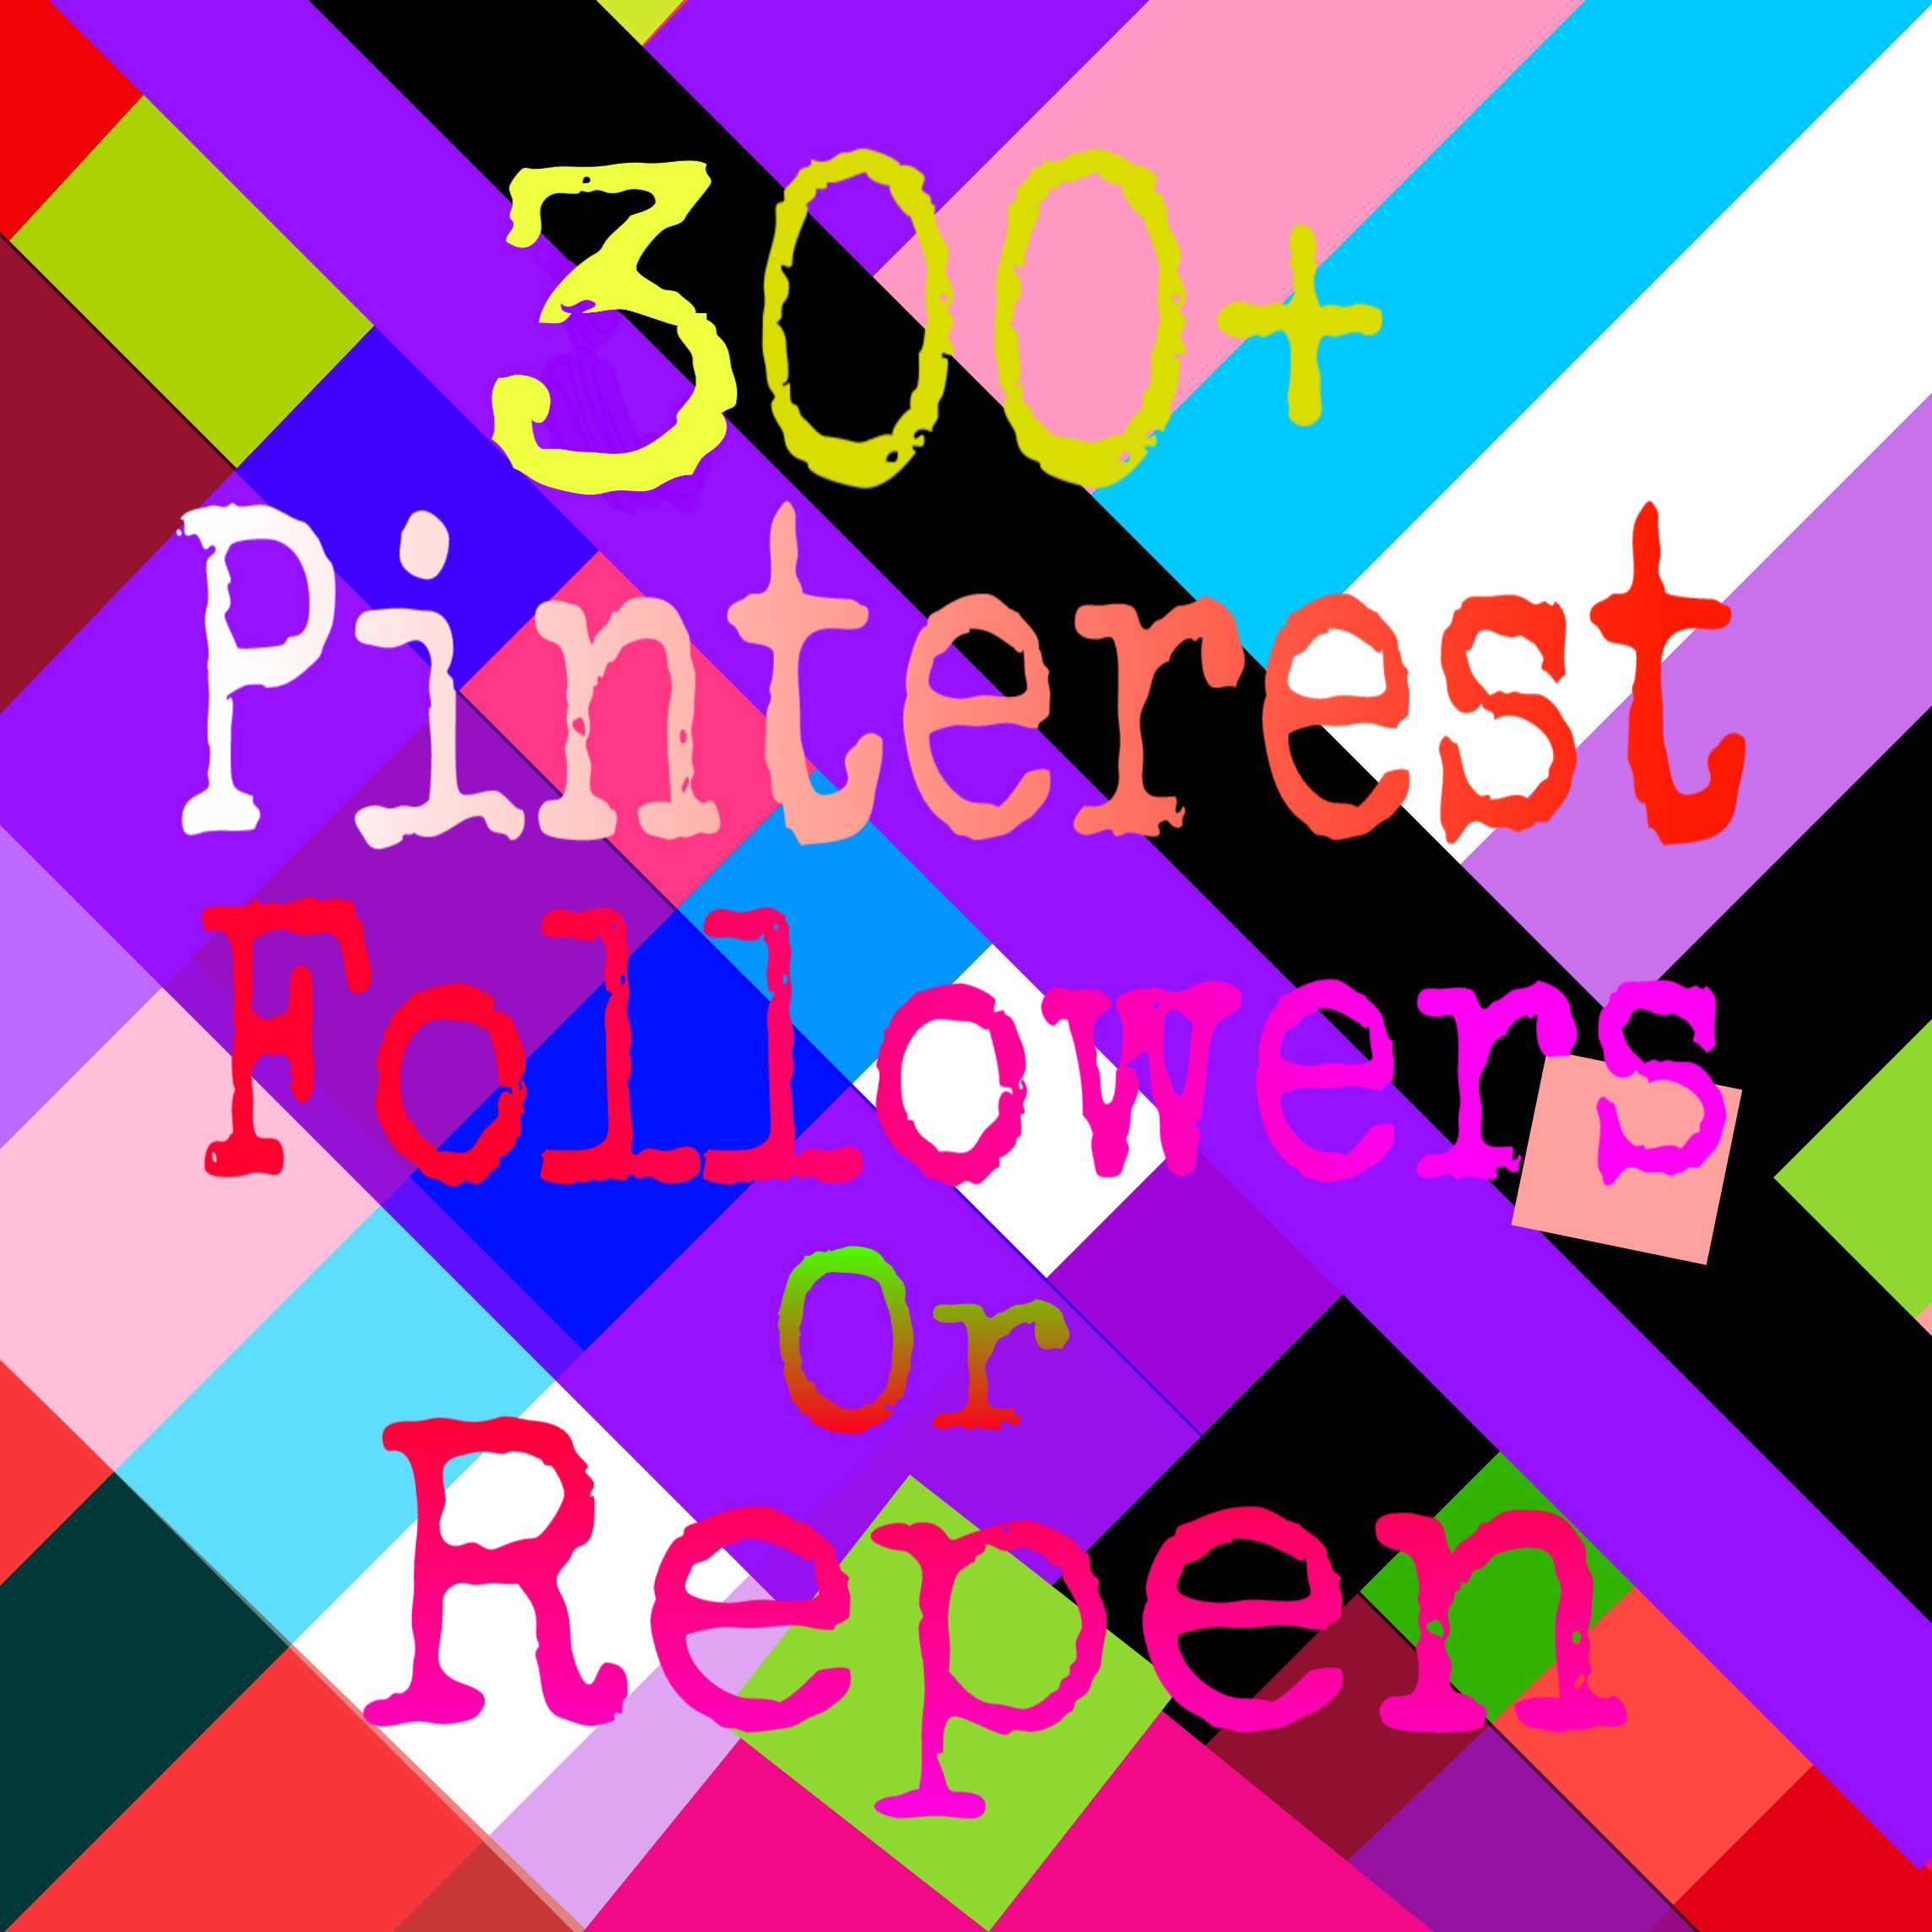 300+ naturally grow world pinterest promotion non drop with fast delivery for $3